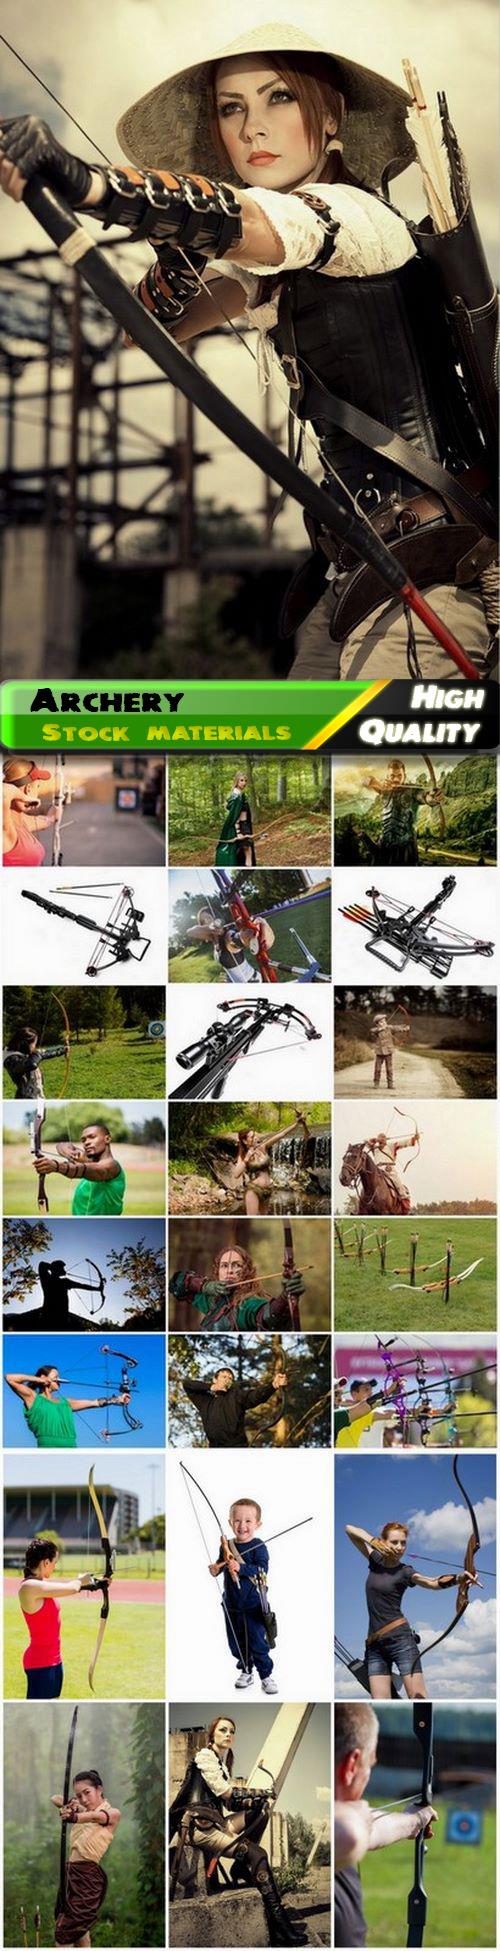 Man and woman shoot from a bow and archery sport 25 HQ Jpg